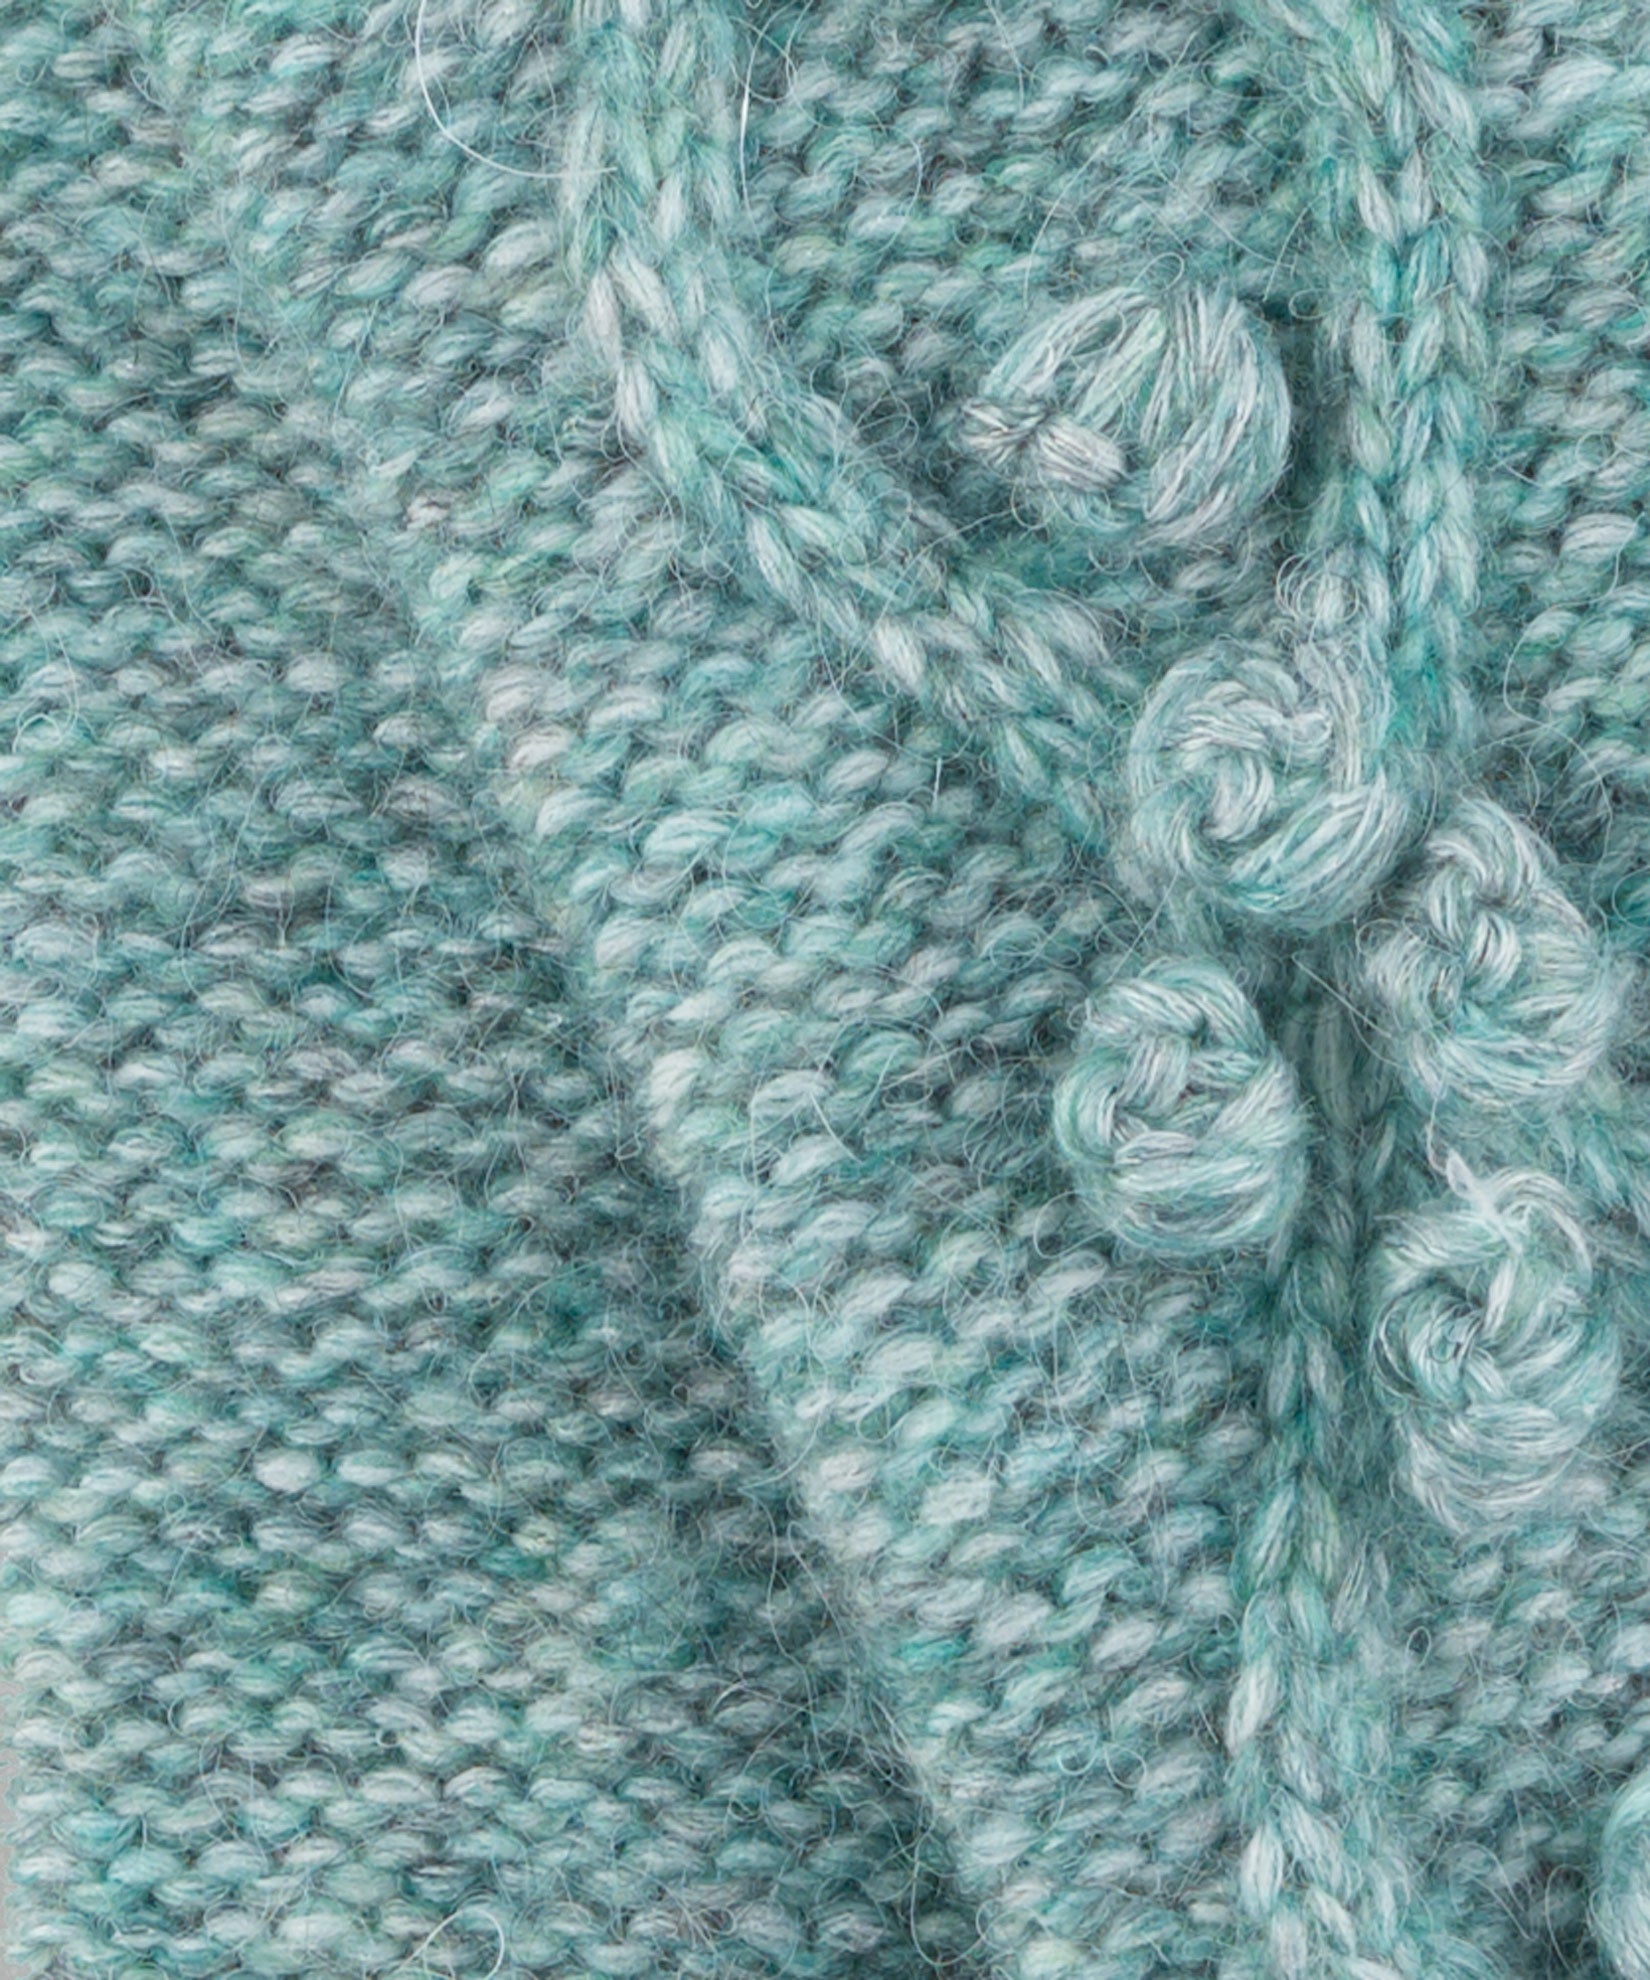 Argyle Textured Arm Warmer in color Jade Mint